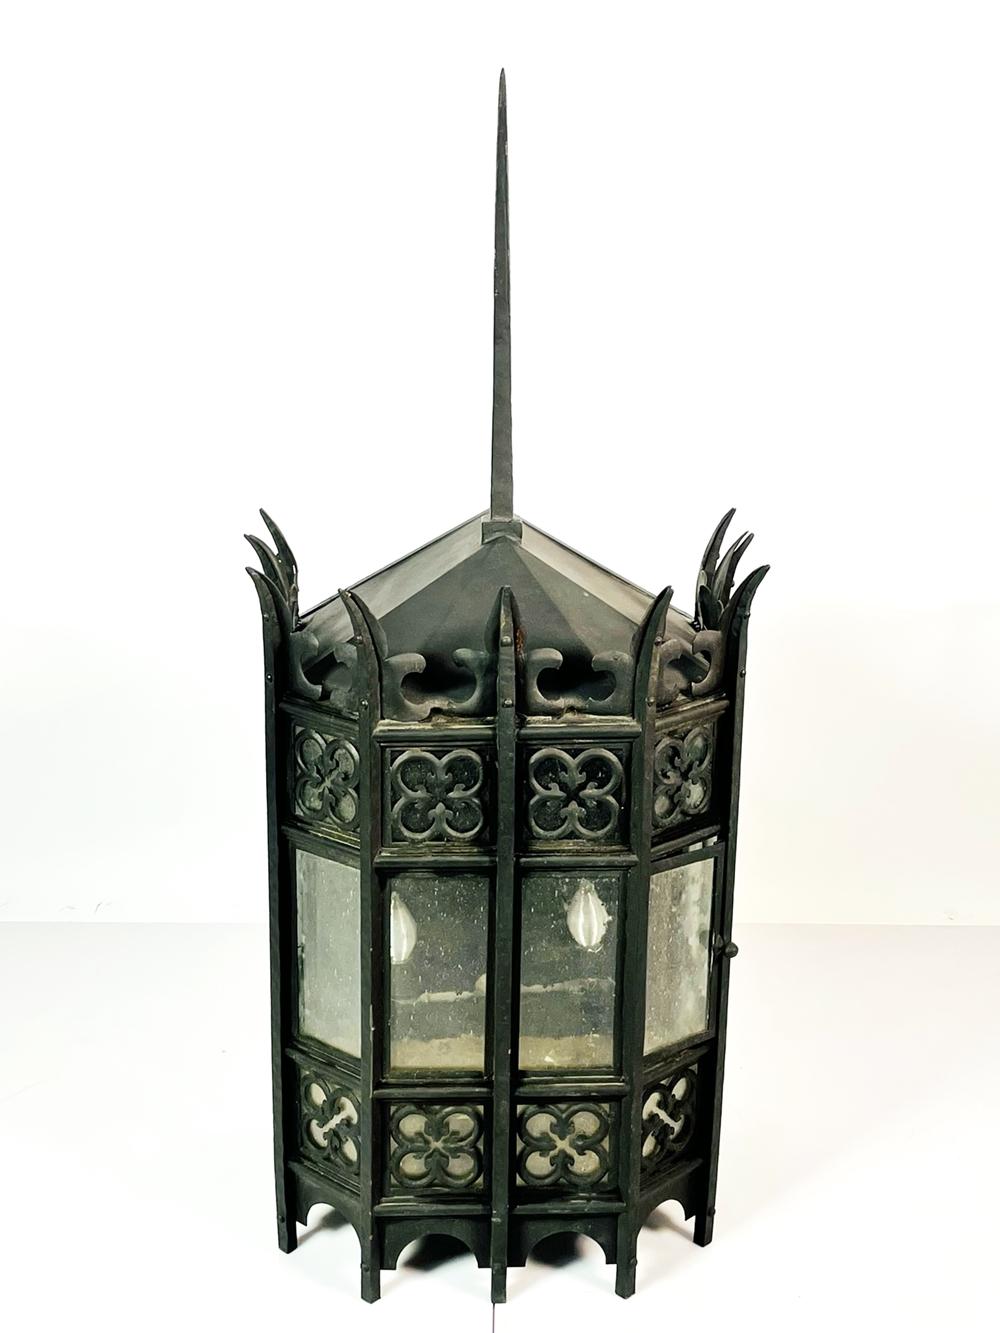 Gothic revival wrought iron and seeded glass wall sconce that came out of the Syklvester Stallone Beverly Park home recently sold to Adele.

The piece was removed fromt he premises on 7/18/2022 as per tag attached to the sconce.

We have a total of